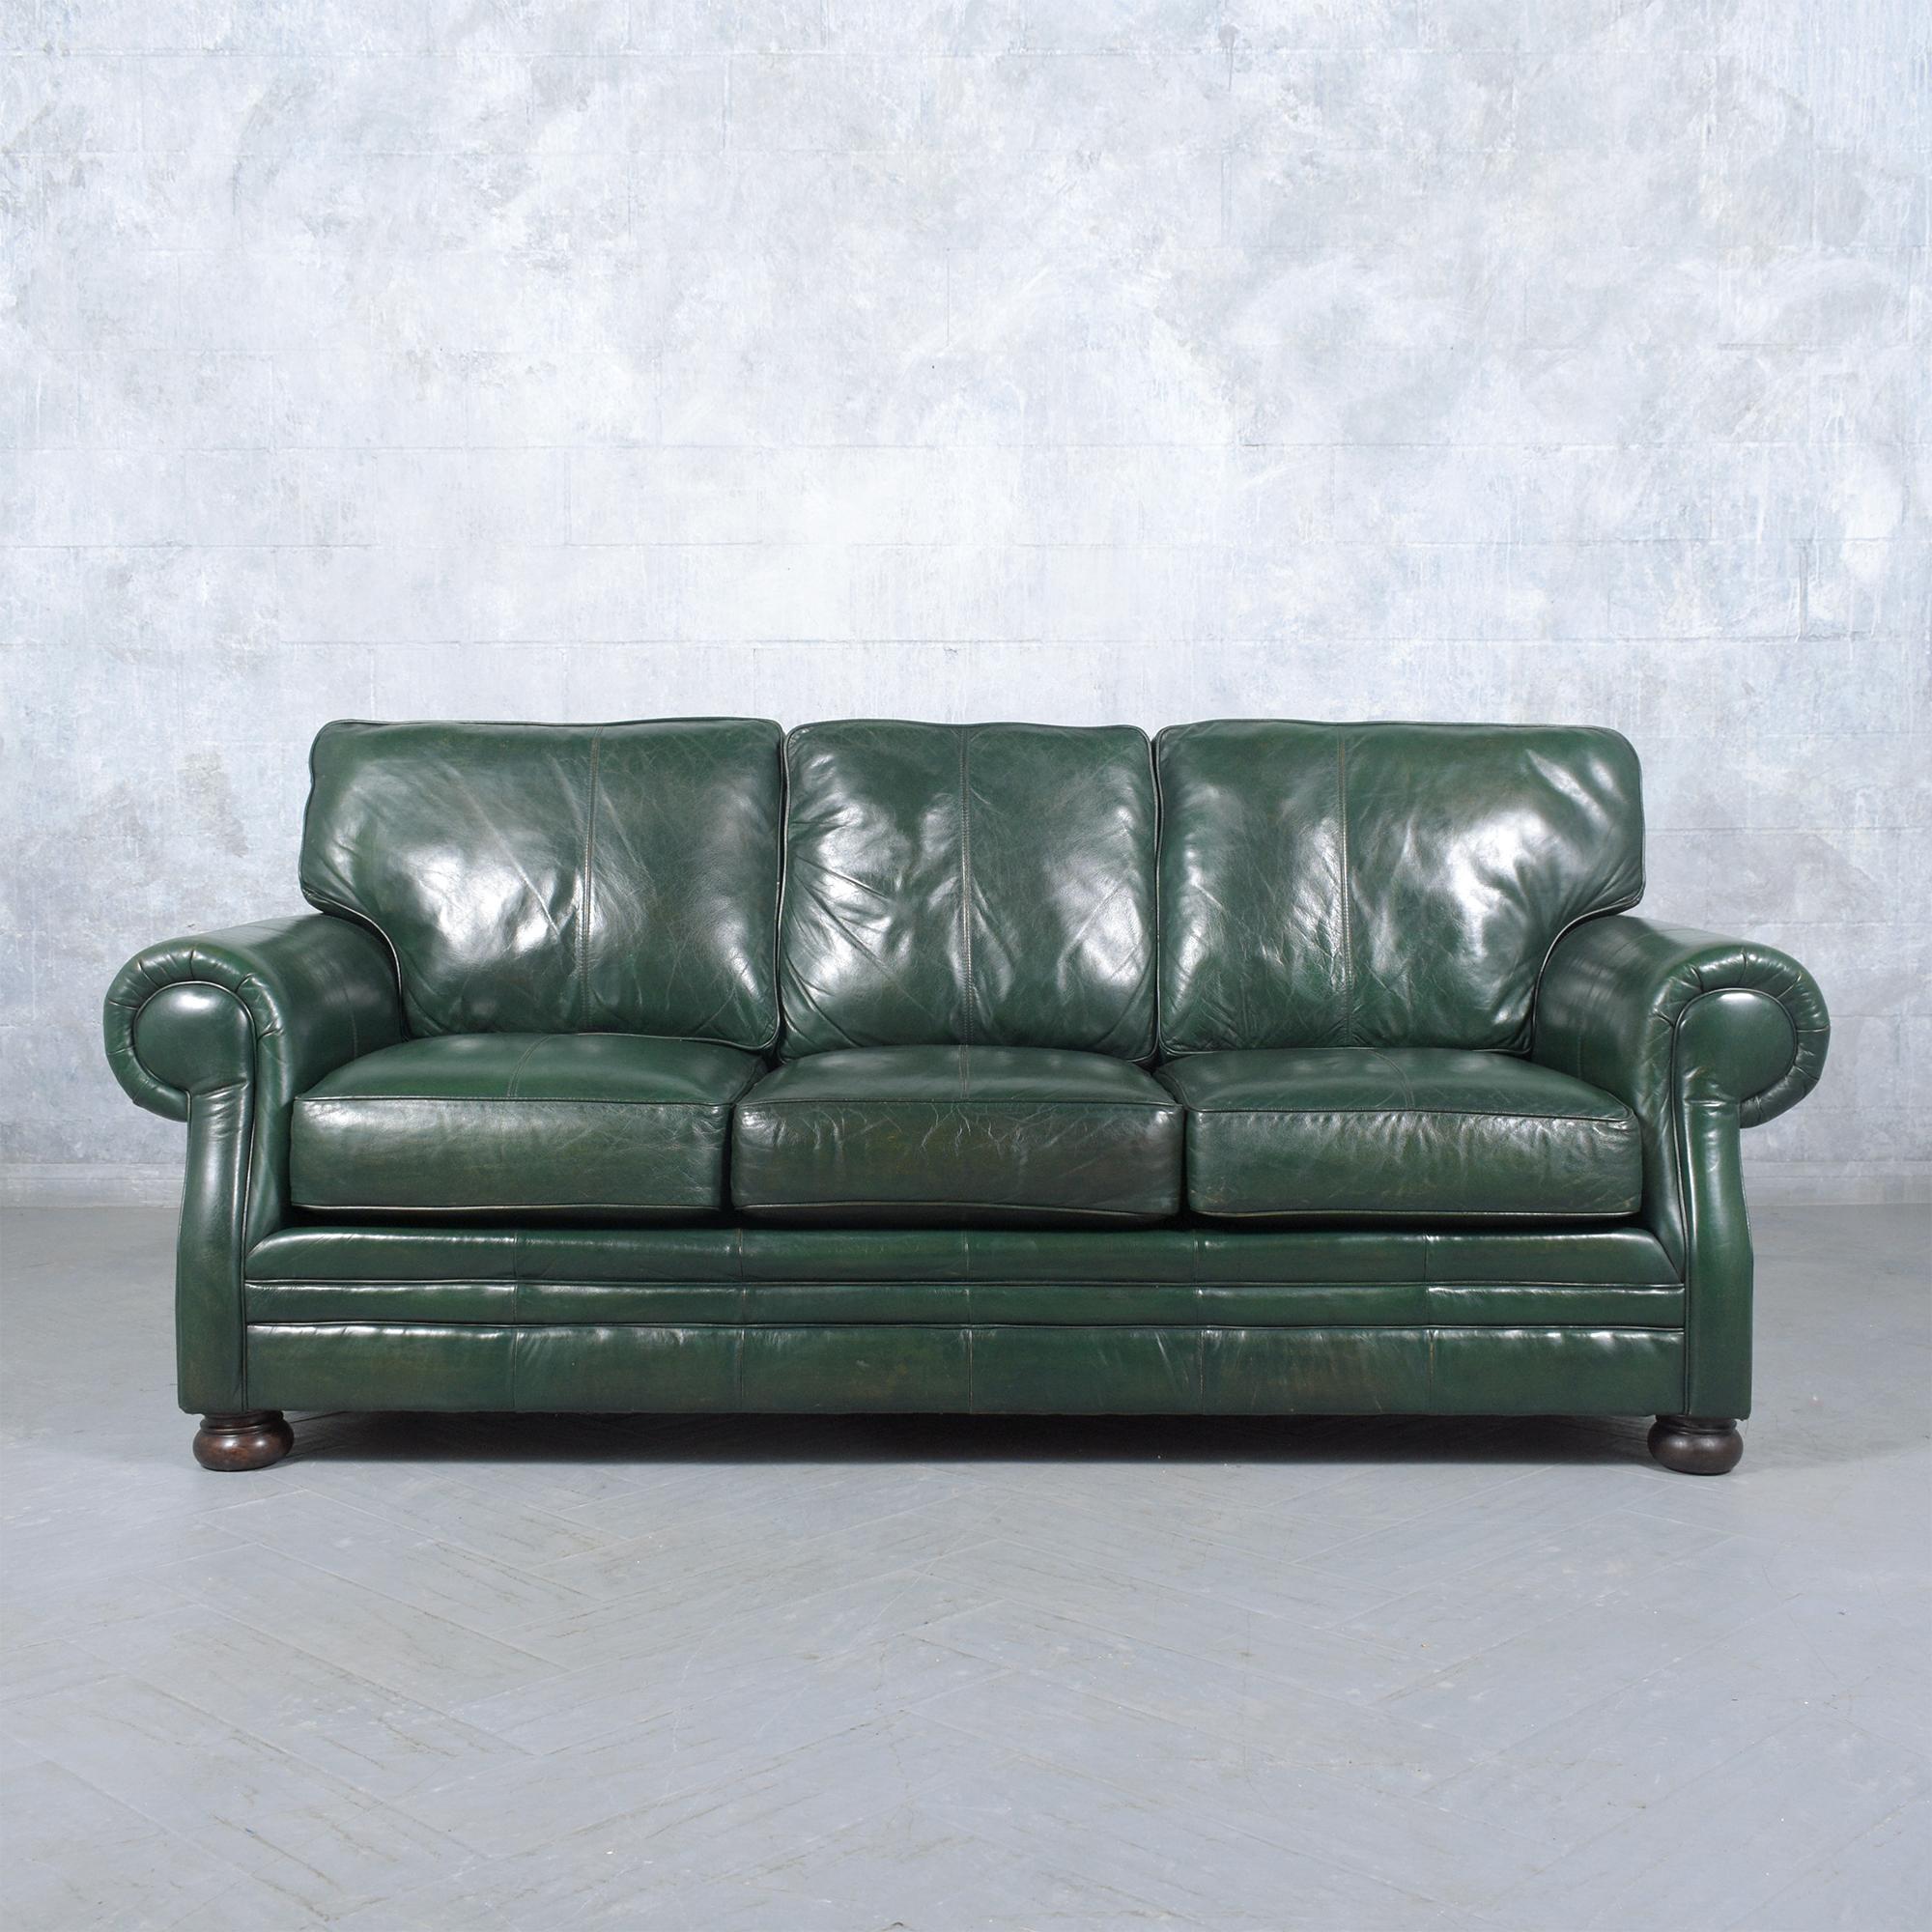 Take a journey back to the 1980s with our extraordinary vintage sofa, a testament to classic style and expert craftsmanship that has been meticulously restored by our professional team. This sofa retains its authentic charm while meeting modern